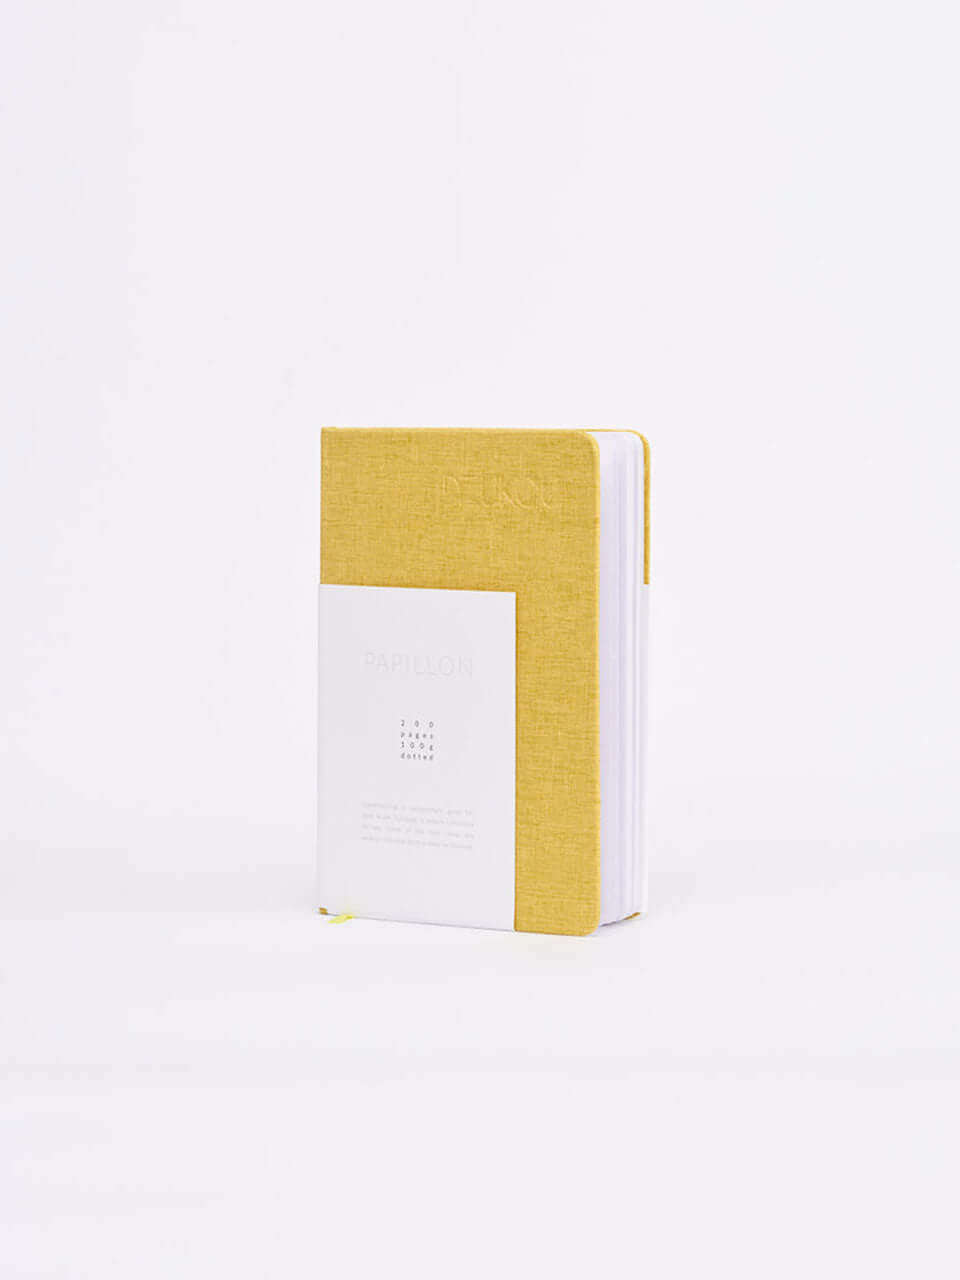 Yellow notebook in a white background